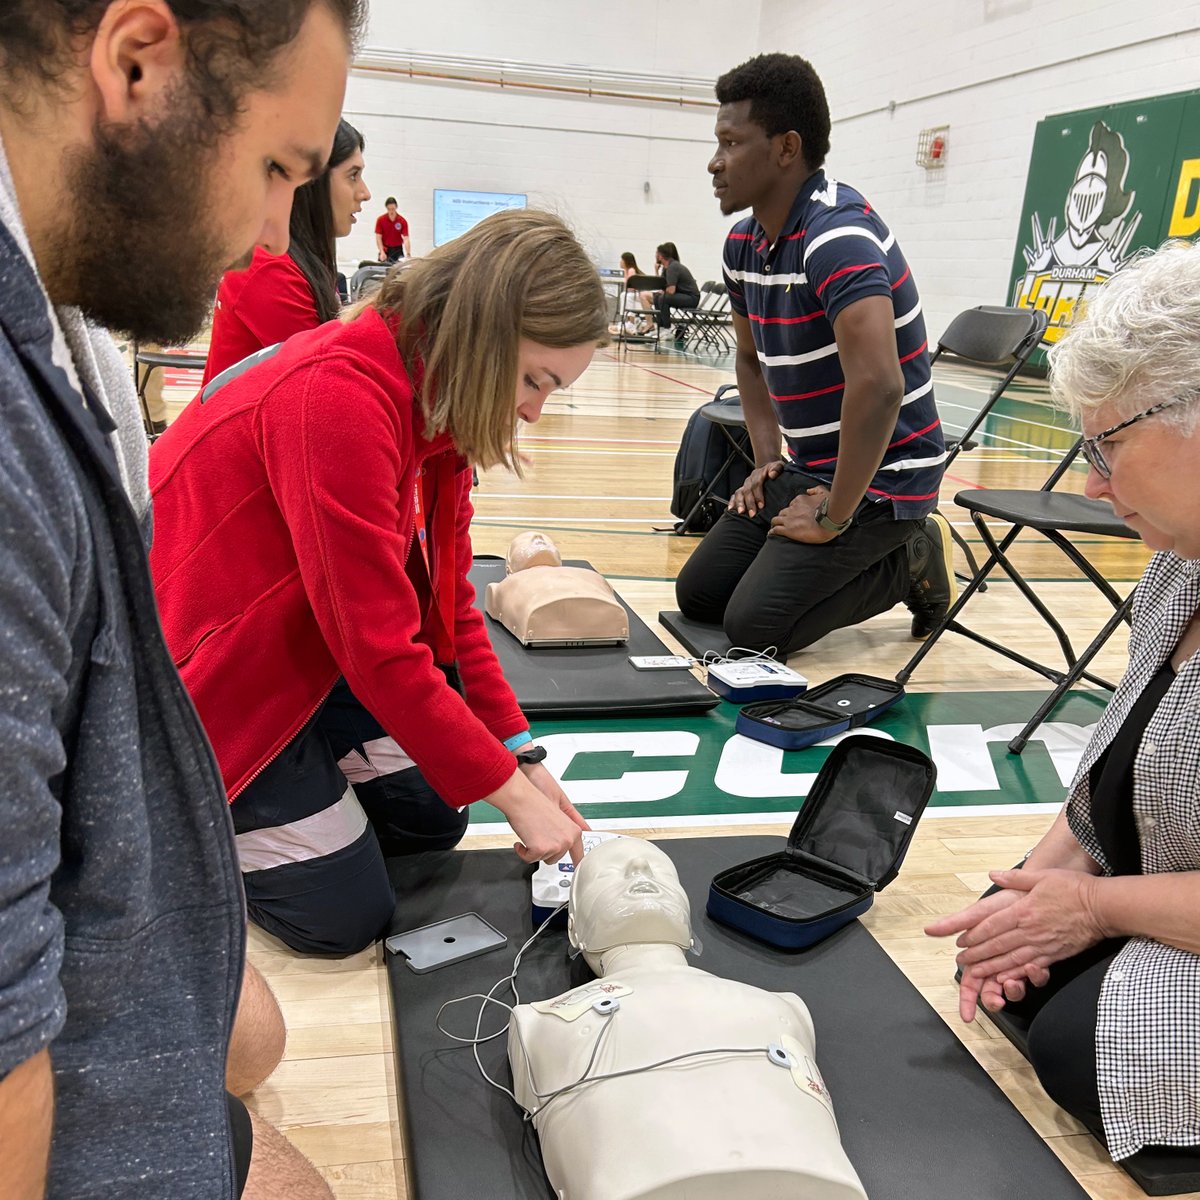 Yesterday, 87 community members learned potentially life-saving skills at CPR clinics presented by our @PulsePoint partners, @OshawaFire, @durhamcollege, @ontariotech_u , @LakeridgeHealth and @drcisst. Thank you to sponsors @GMcanada + @OnStar.
More: oshawa.ca/en/news/pulsep…